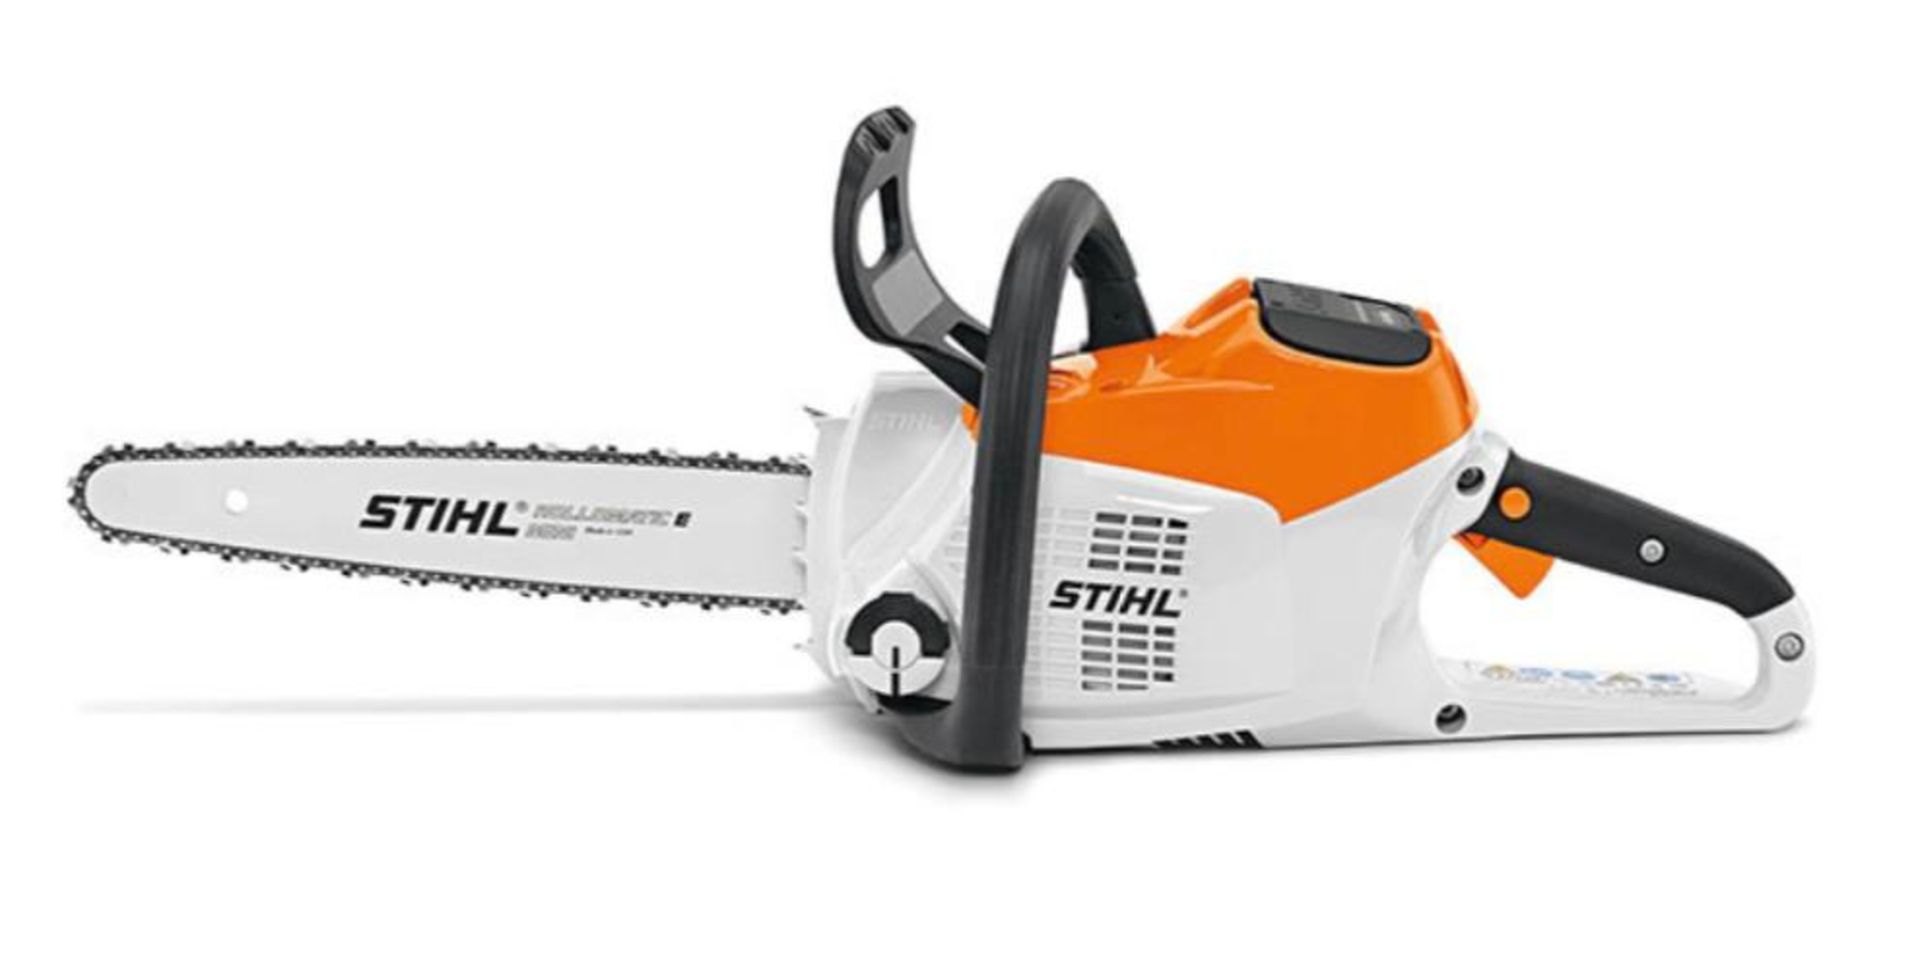 NEW AND UNUSED STIHL MSA 200C BATTERY OPERATED CORDLESS CHAINSAW, 14" BAR AND CHAIN *NO VAT* - Image 2 of 3